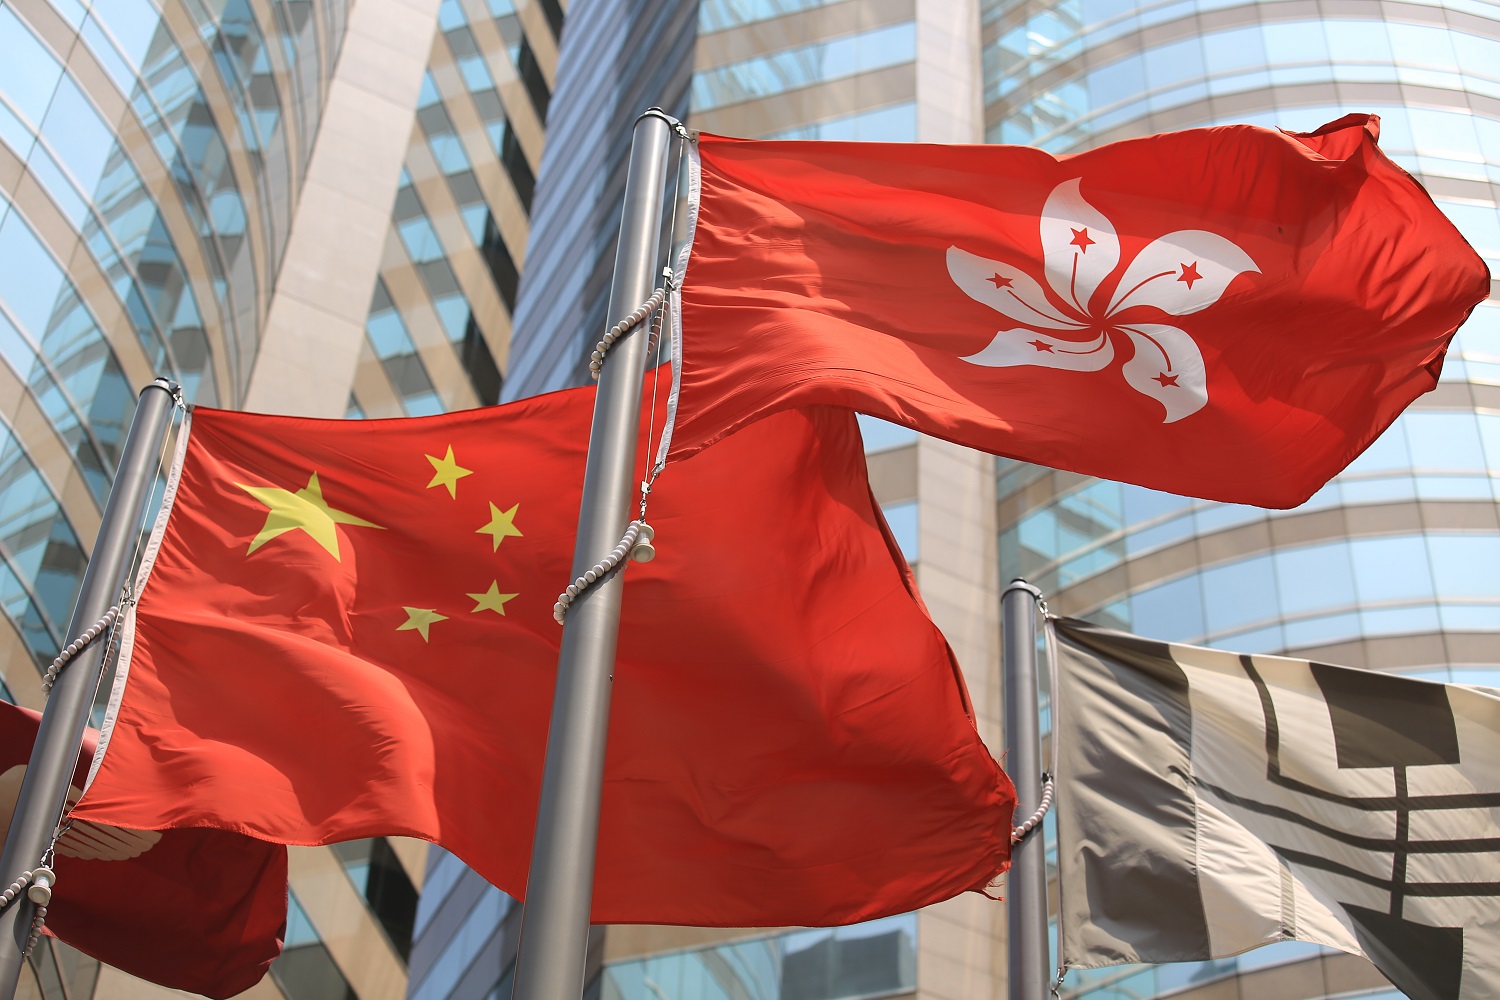 The flags of China and Hong Kong, hoisted on flagpoles and blowing in the wind.